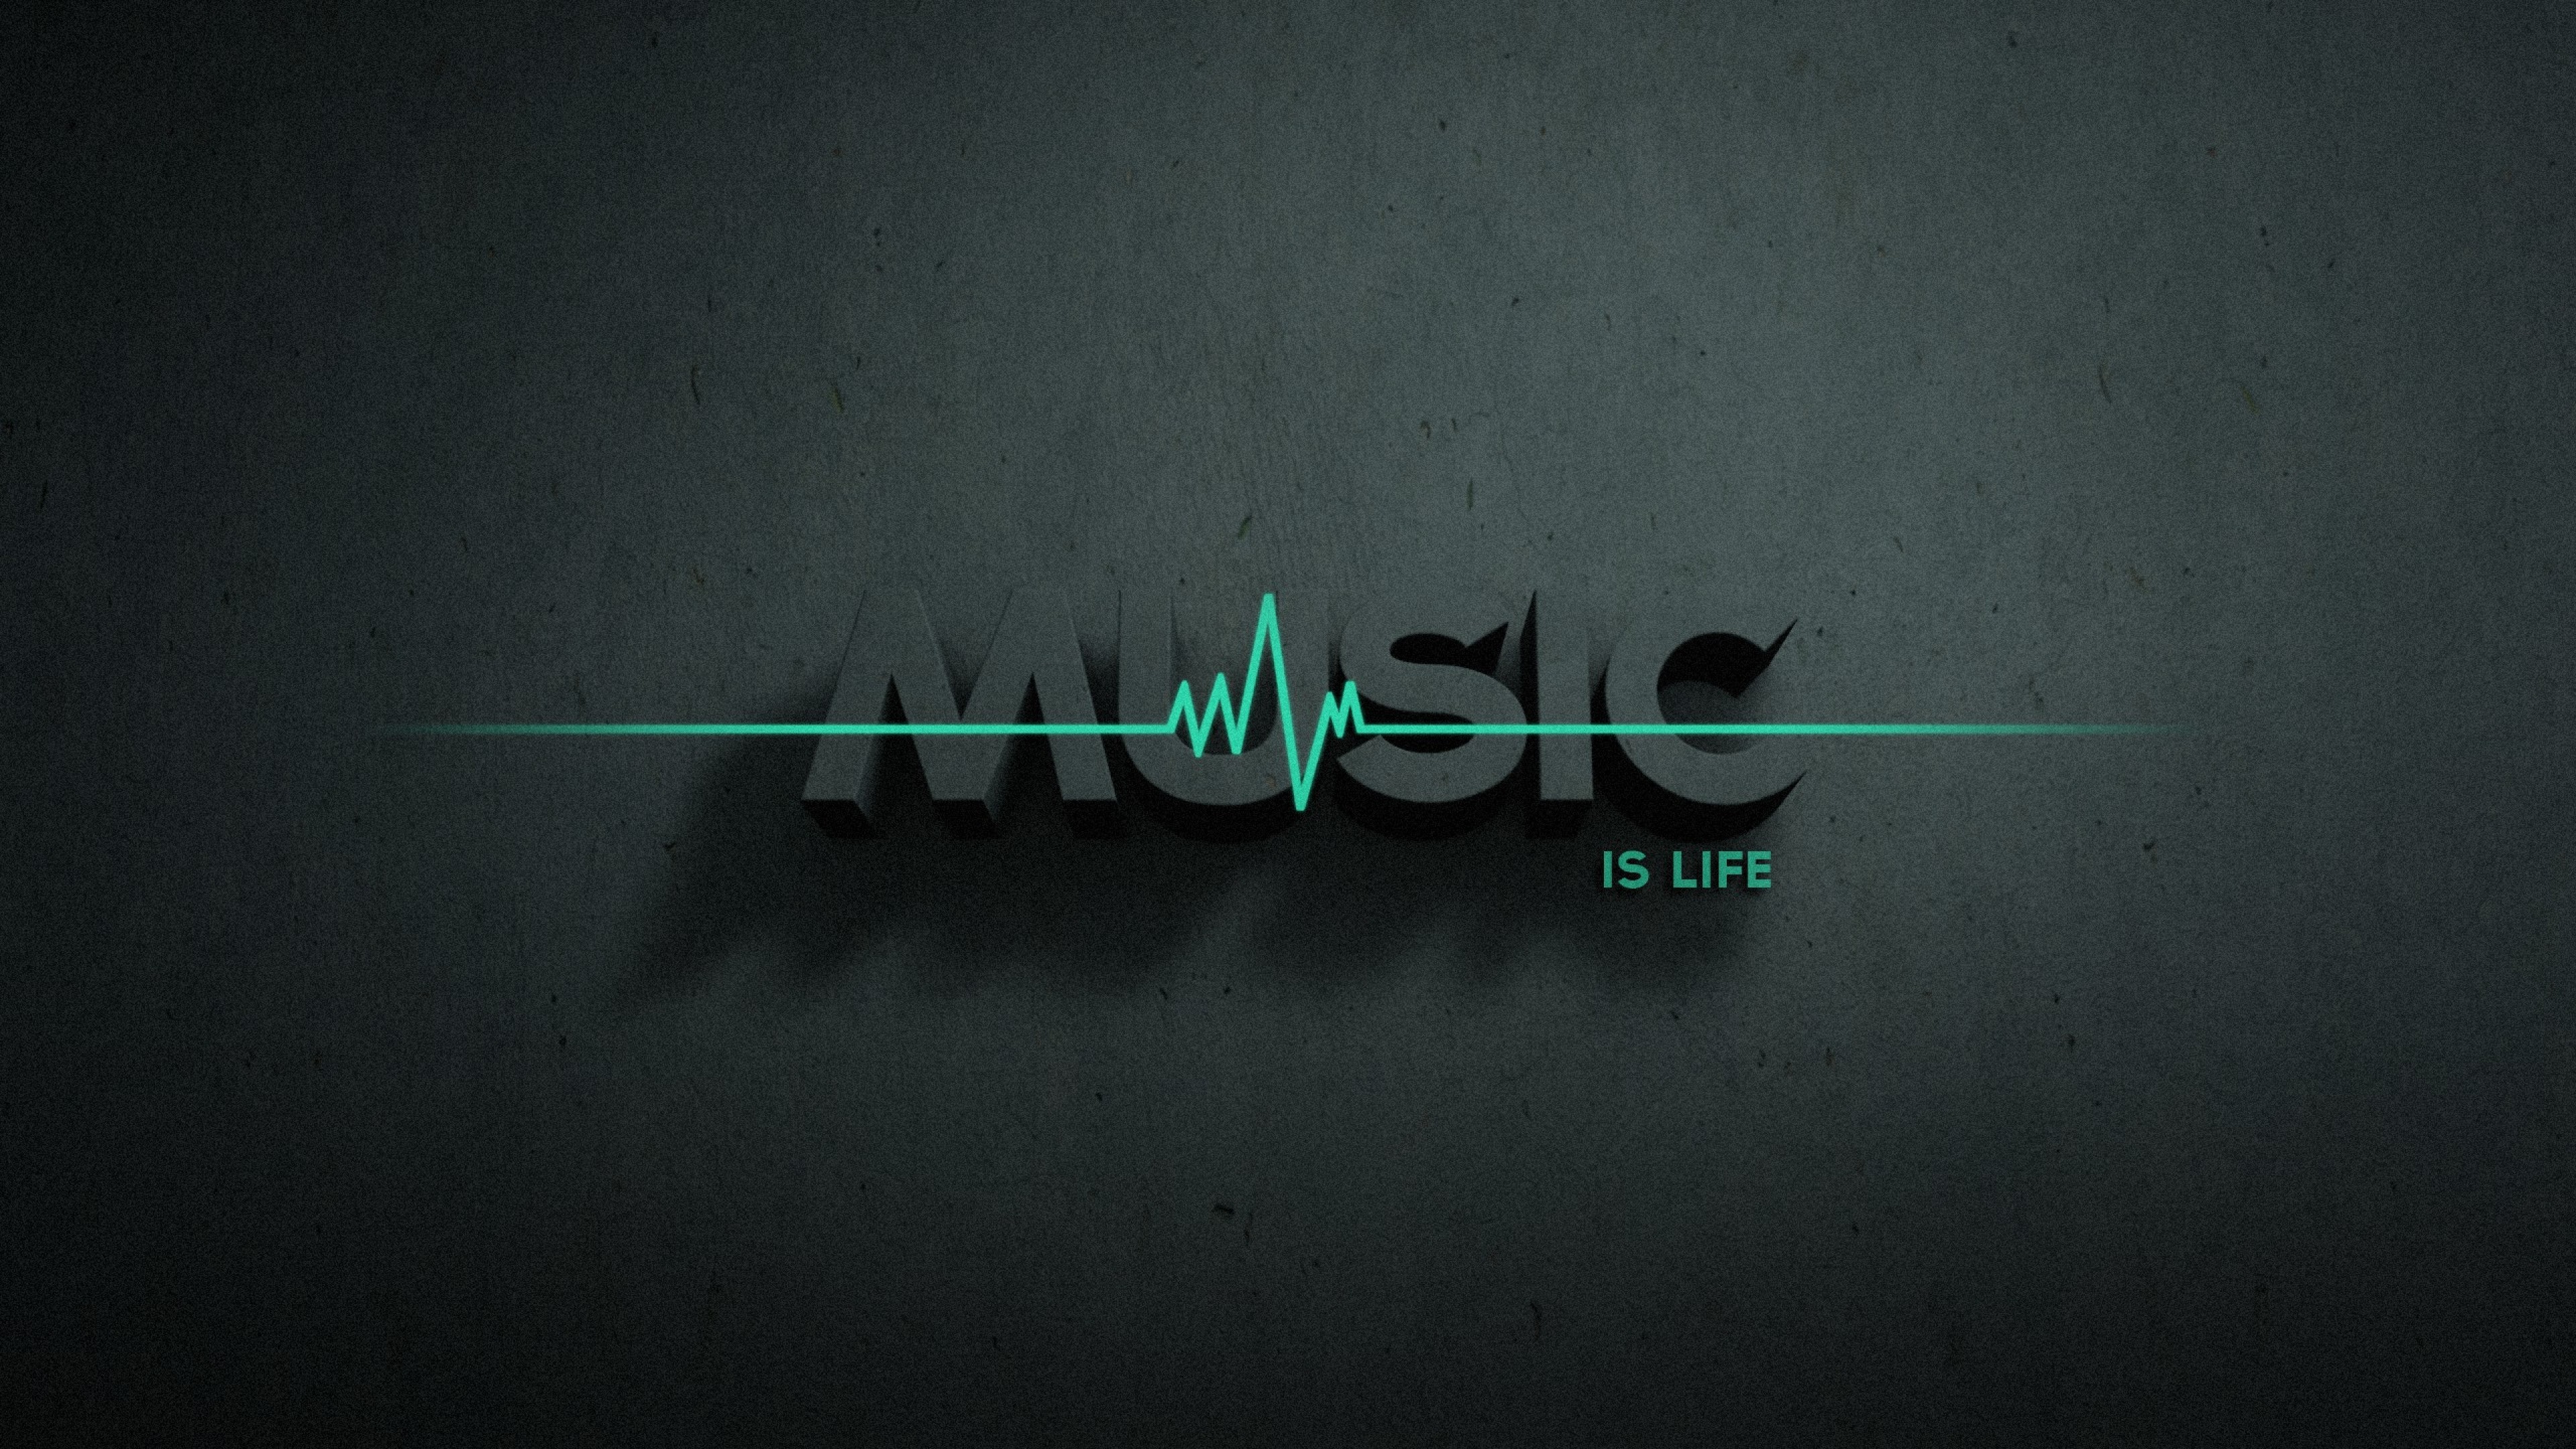 3840x2160 Green wall - Life is music